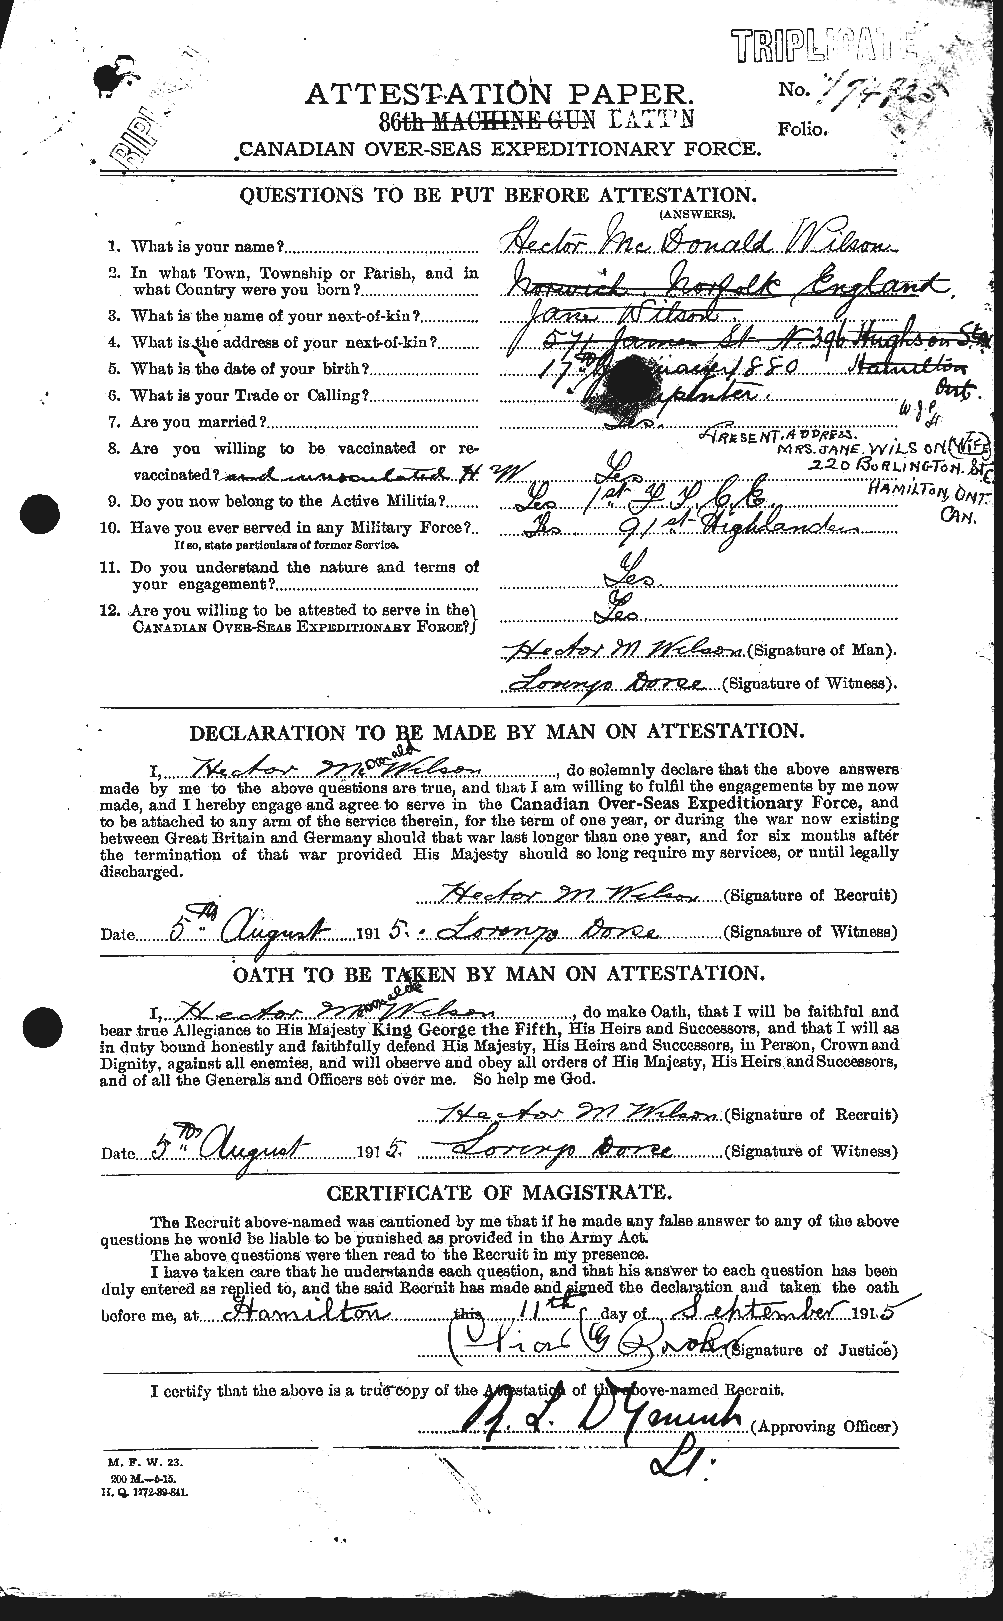 Personnel Records of the First World War - CEF 679490a